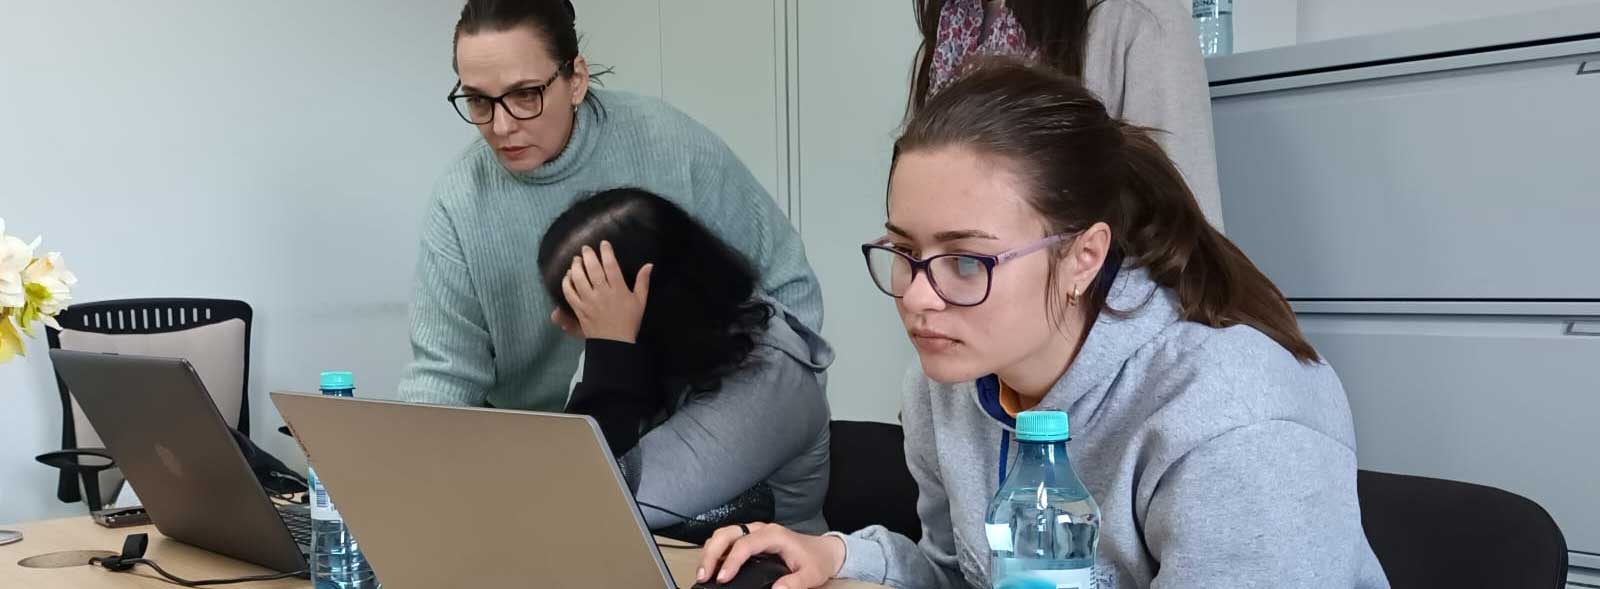 Romanian students studying with the support of a facilitator